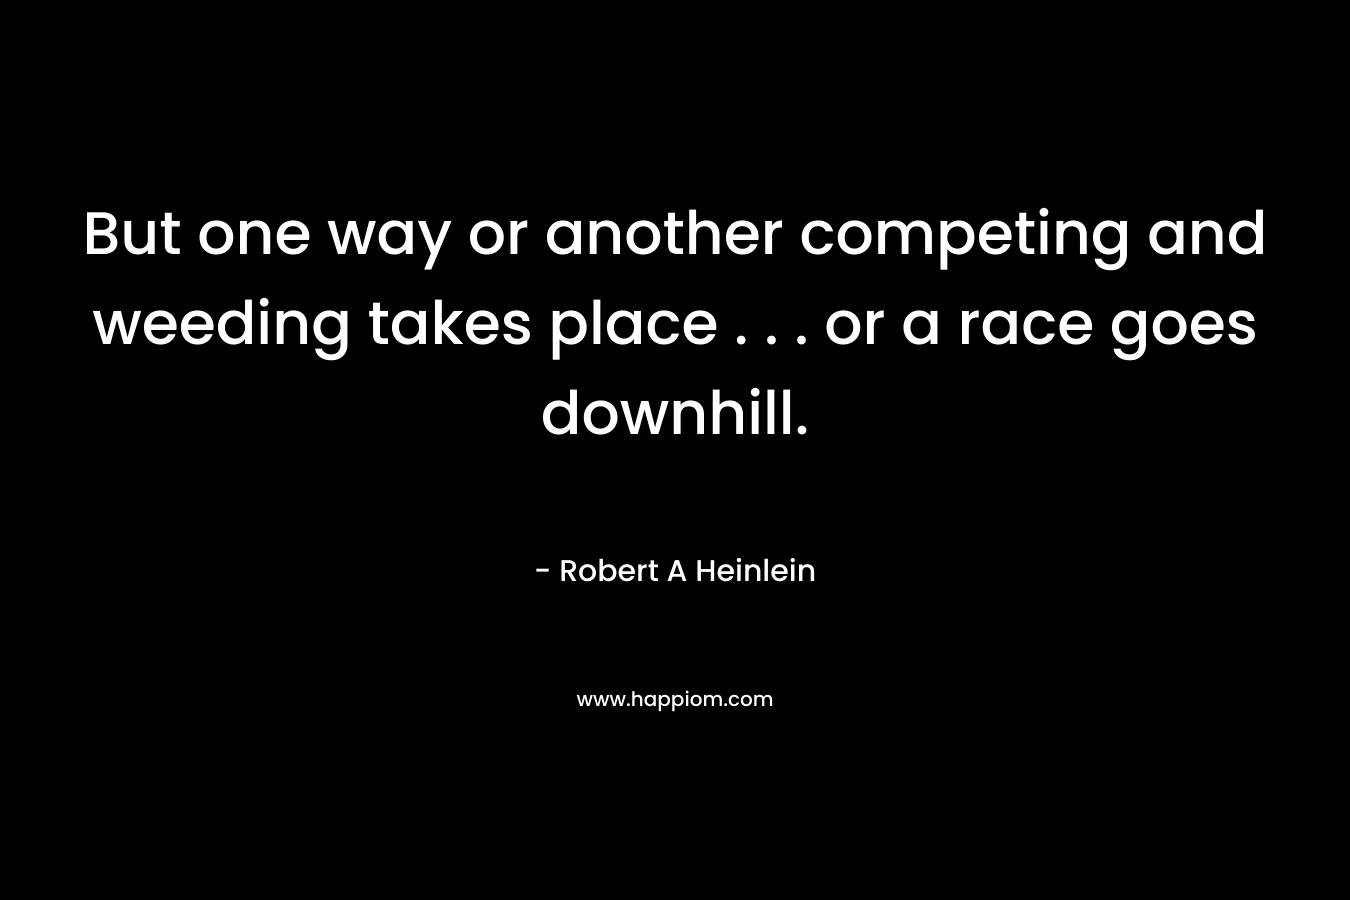 But one way or another competing and weeding takes place . . . or a race goes downhill. – Robert A Heinlein